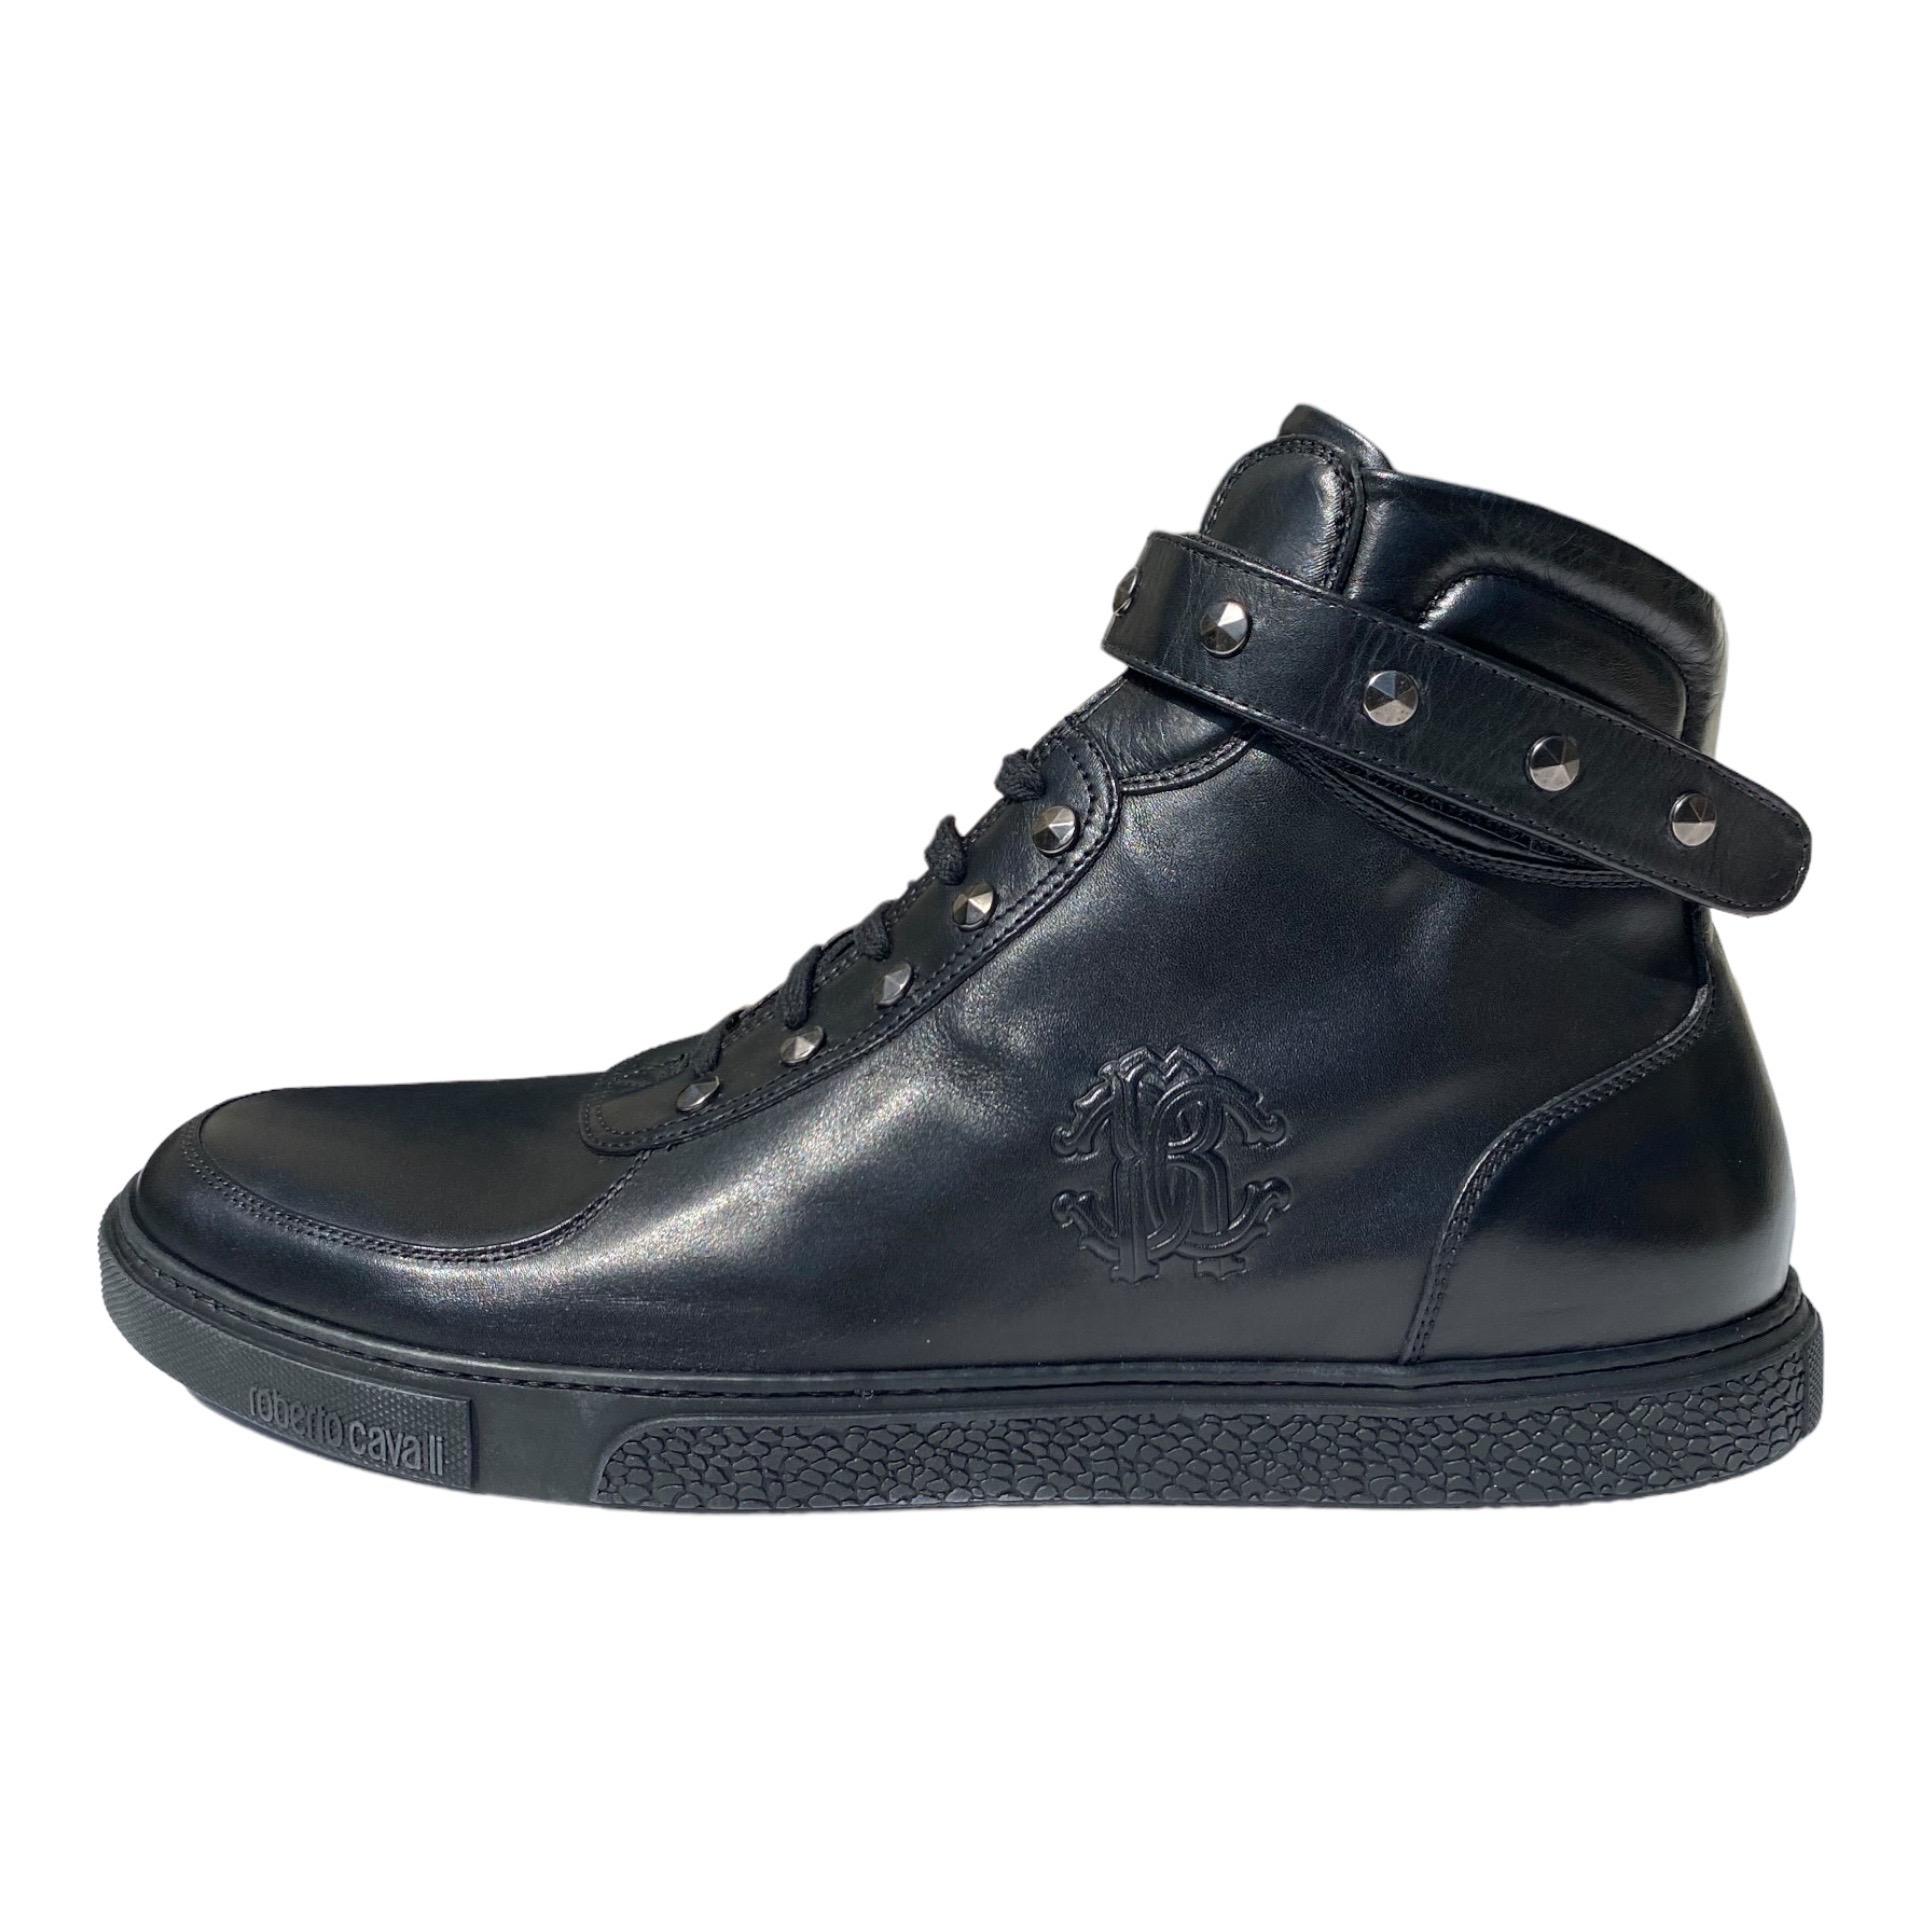 New Roberto Cavalli Studded Black Leather High Top Sneakers for Men 43.5 - 45 For Sale